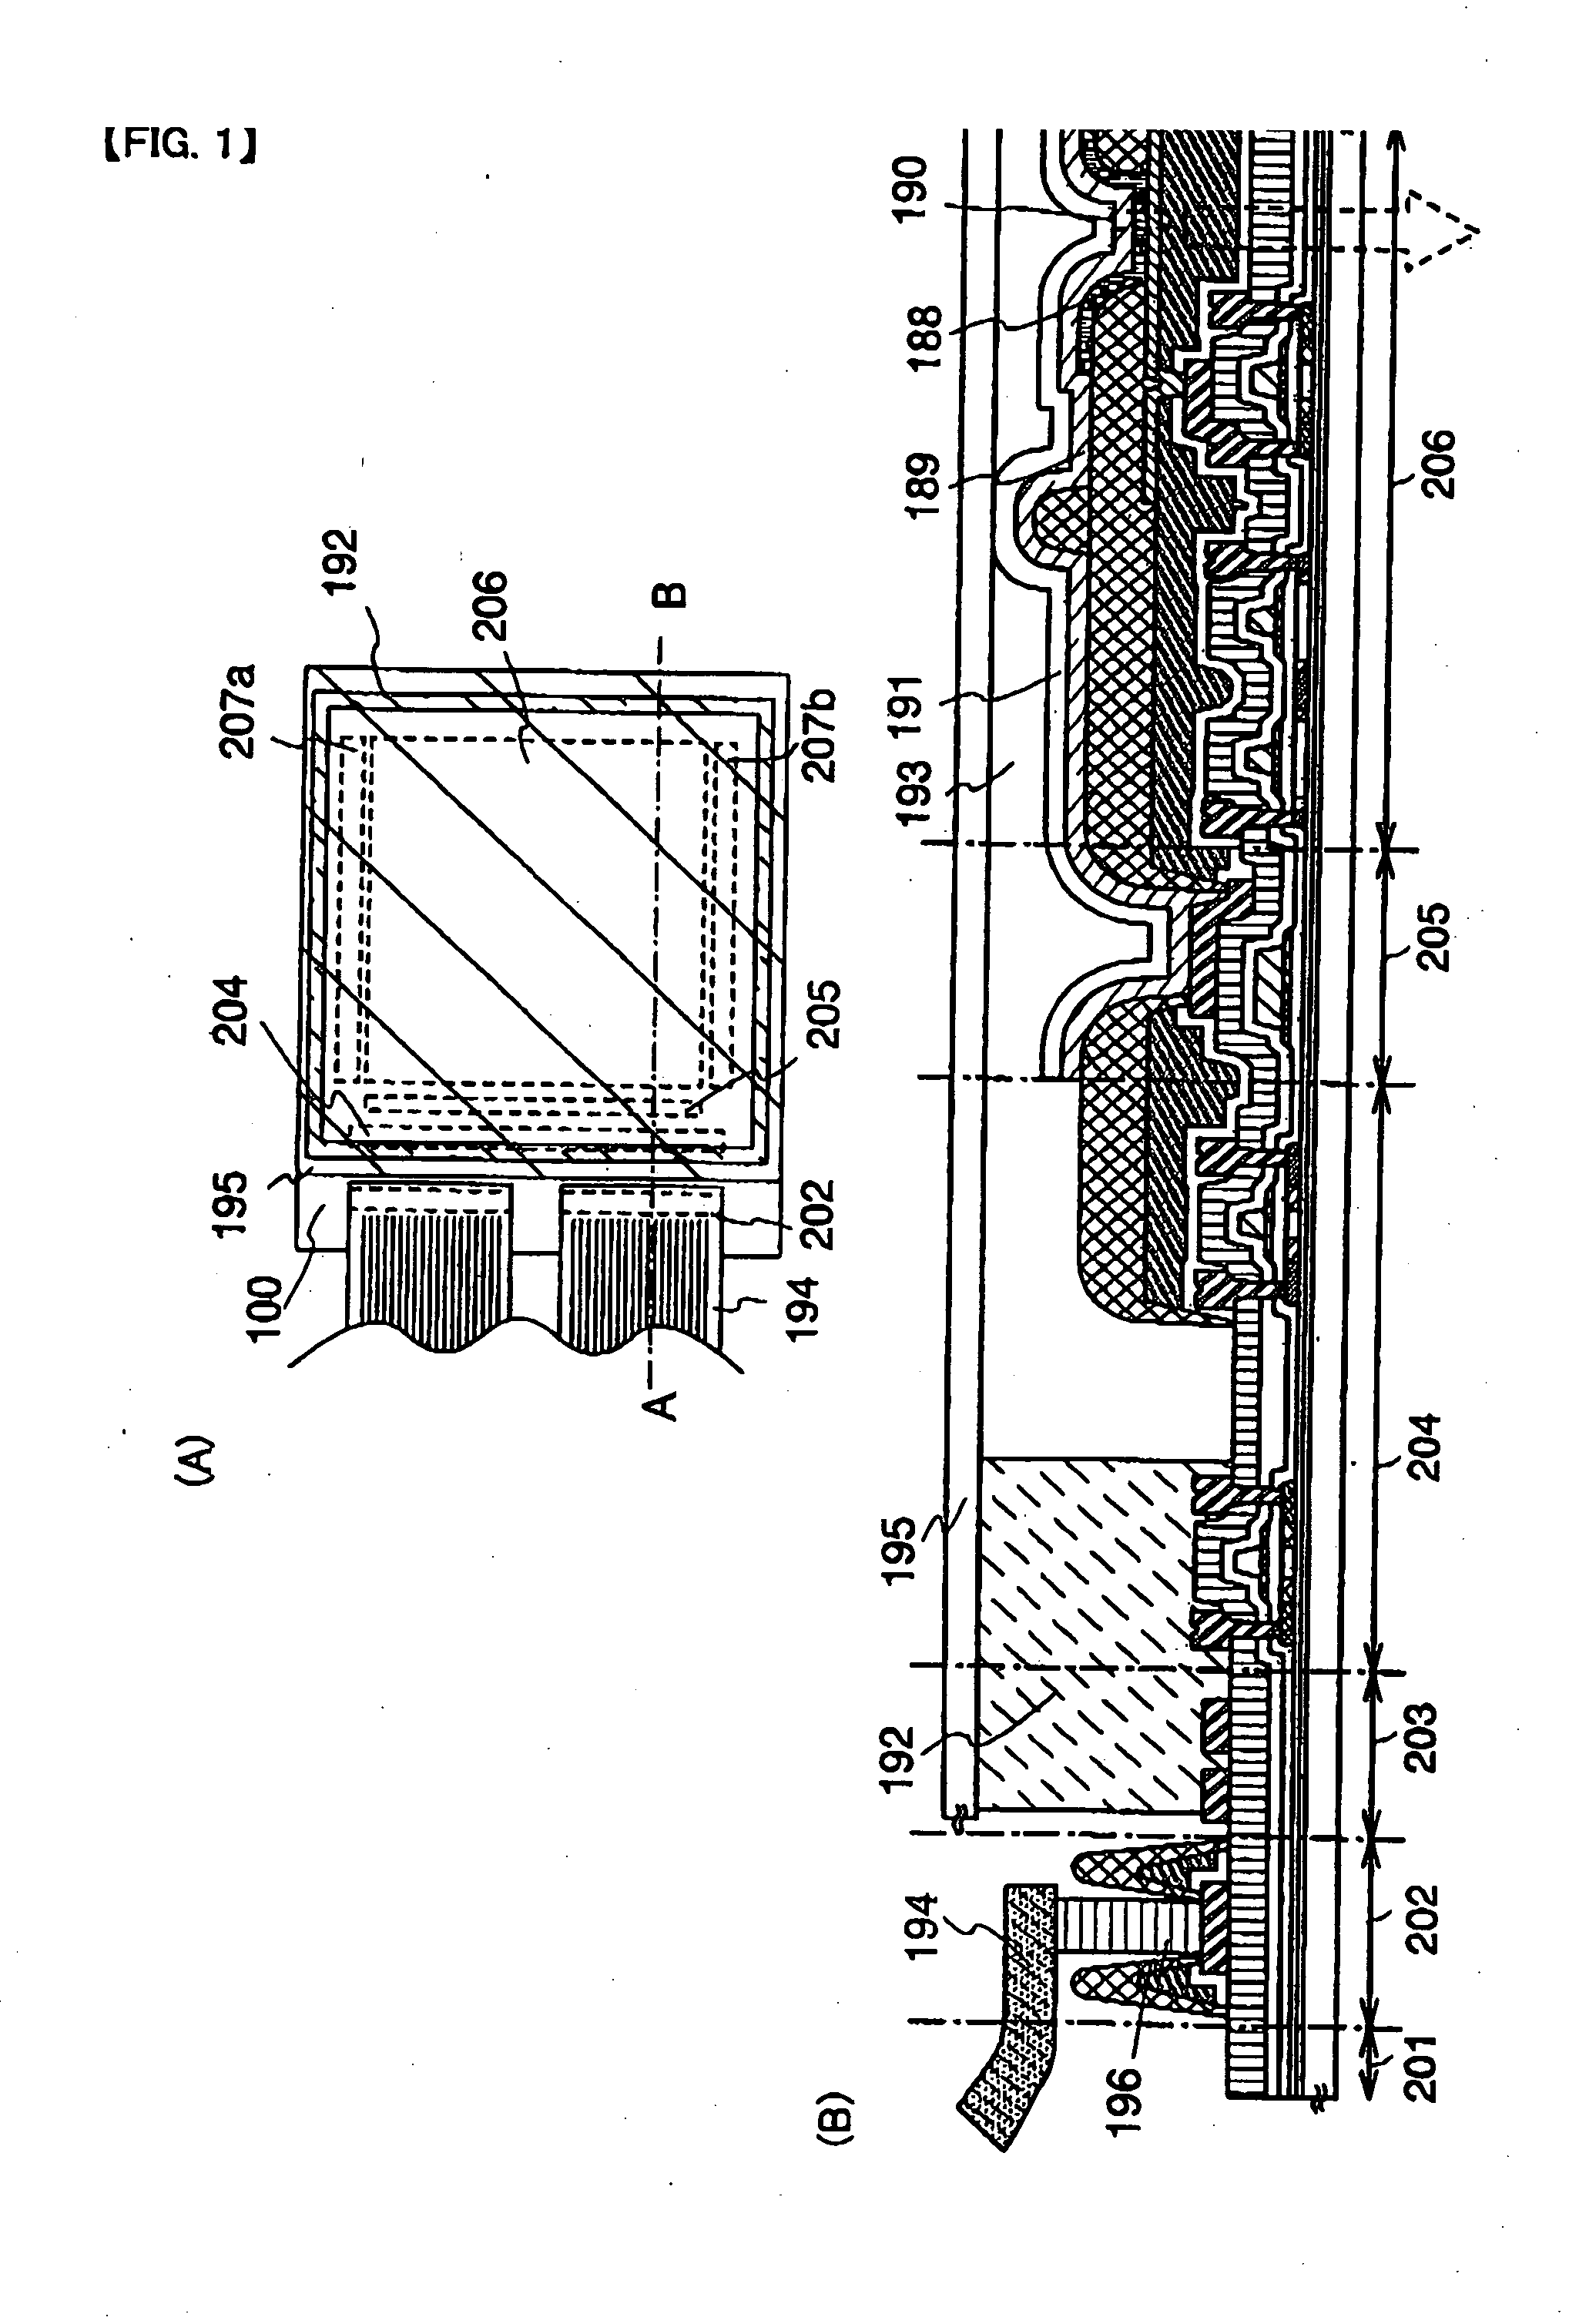 Display device, electronic apparatus, and method of fabricating the display device